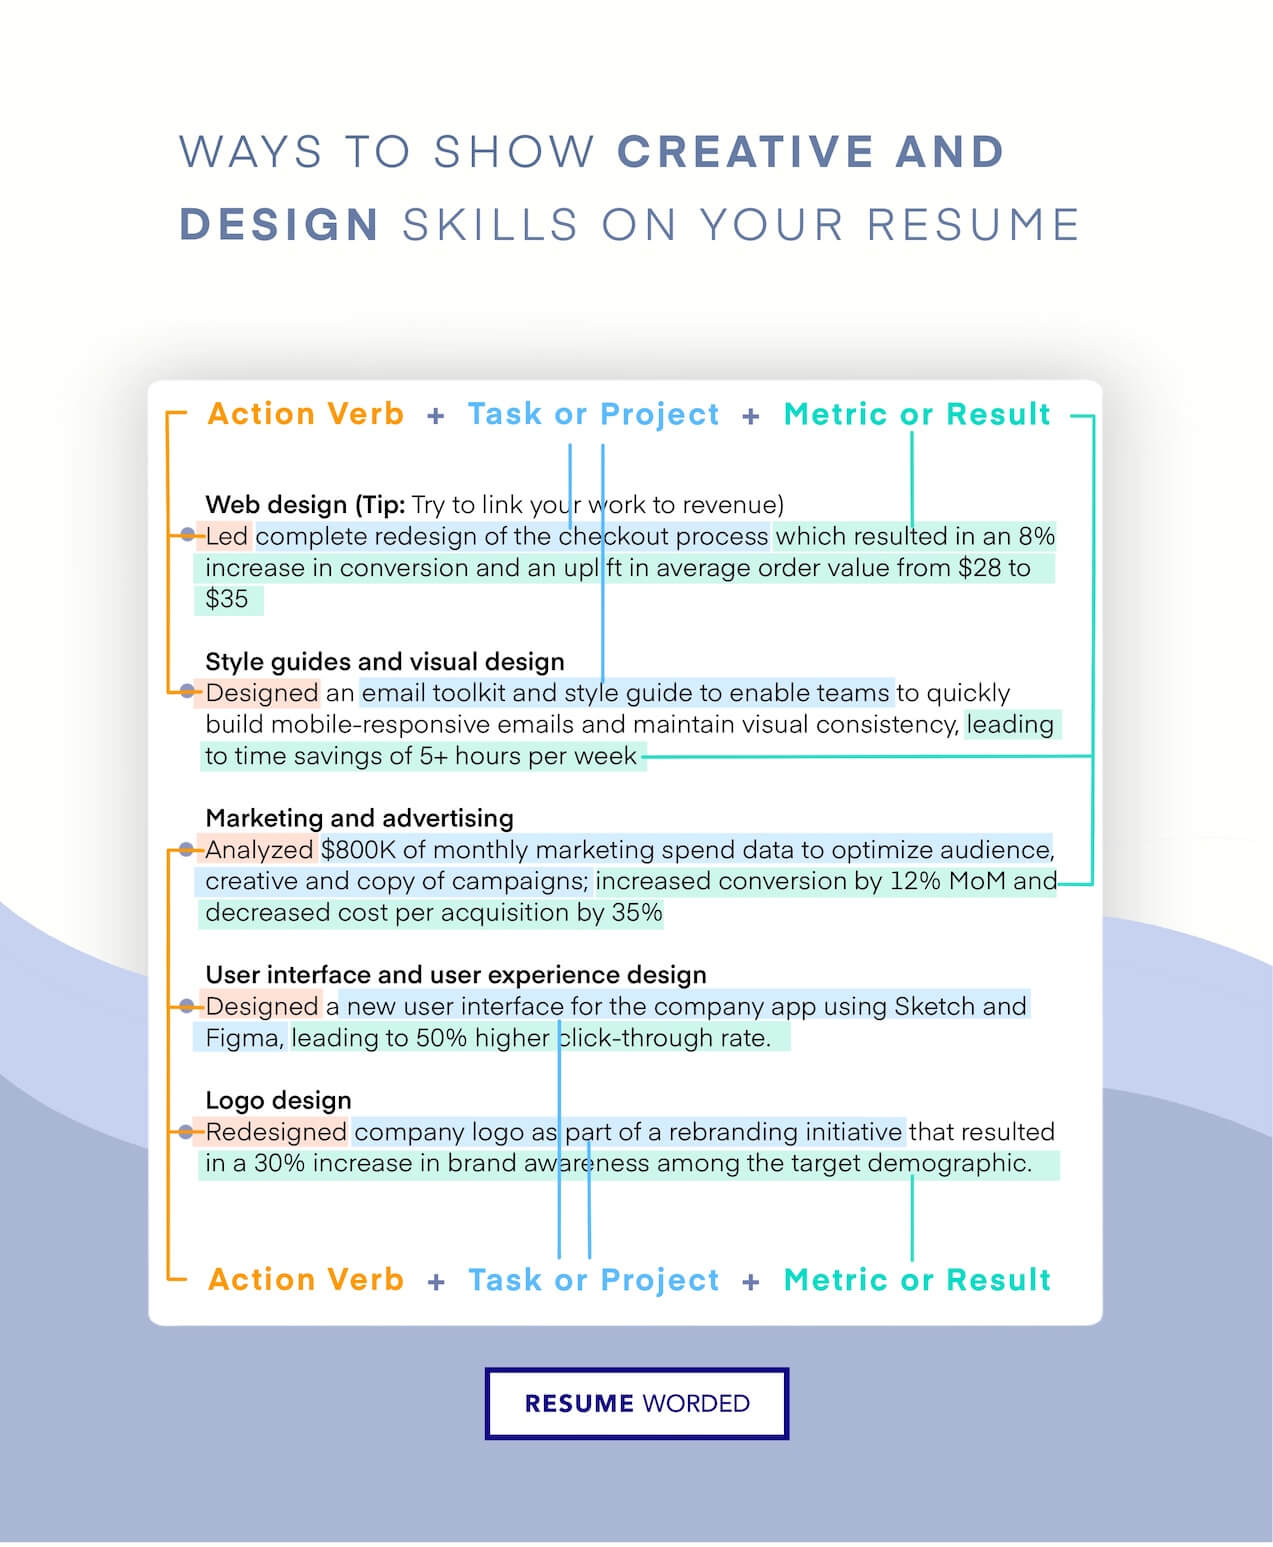 Illustrate your project management skills - Production Executive Resume